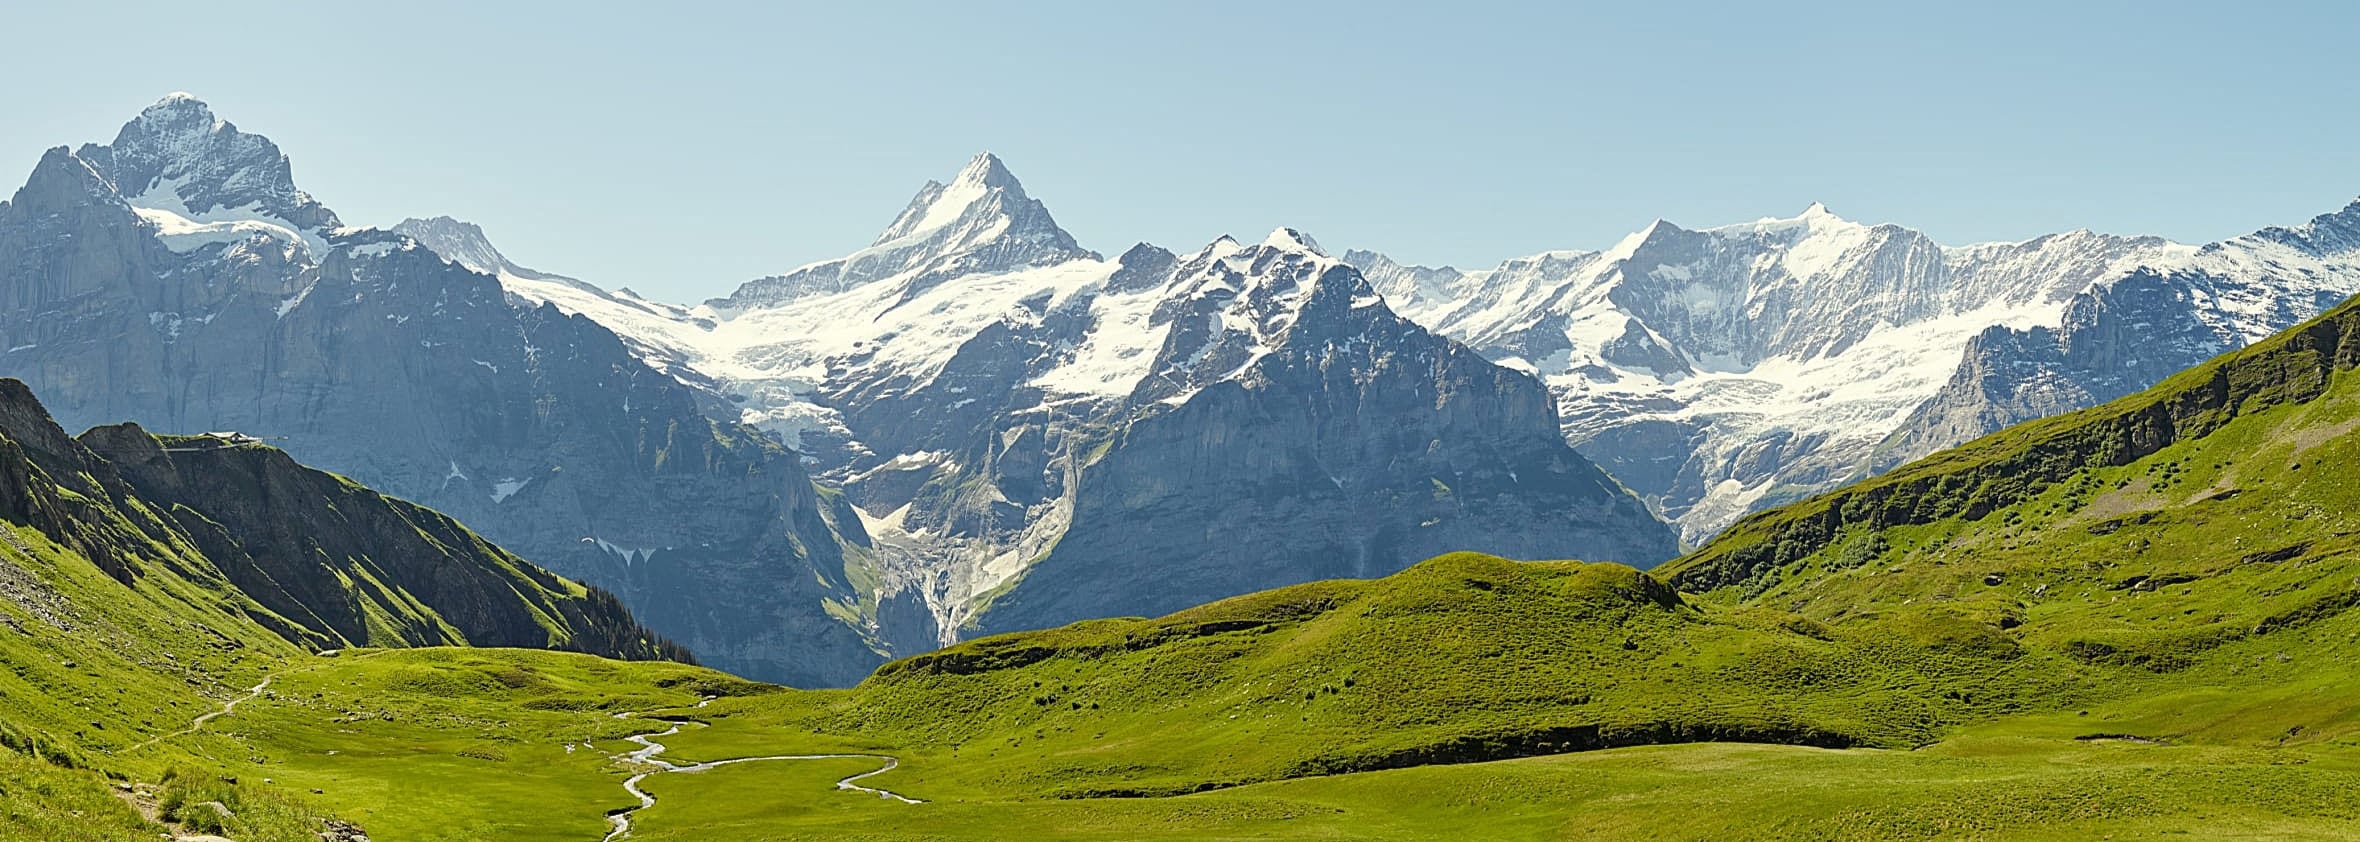 from Grindelwald - Echo Trails offers a series of delightful walking and hiking tours, geared to your interests and abilities